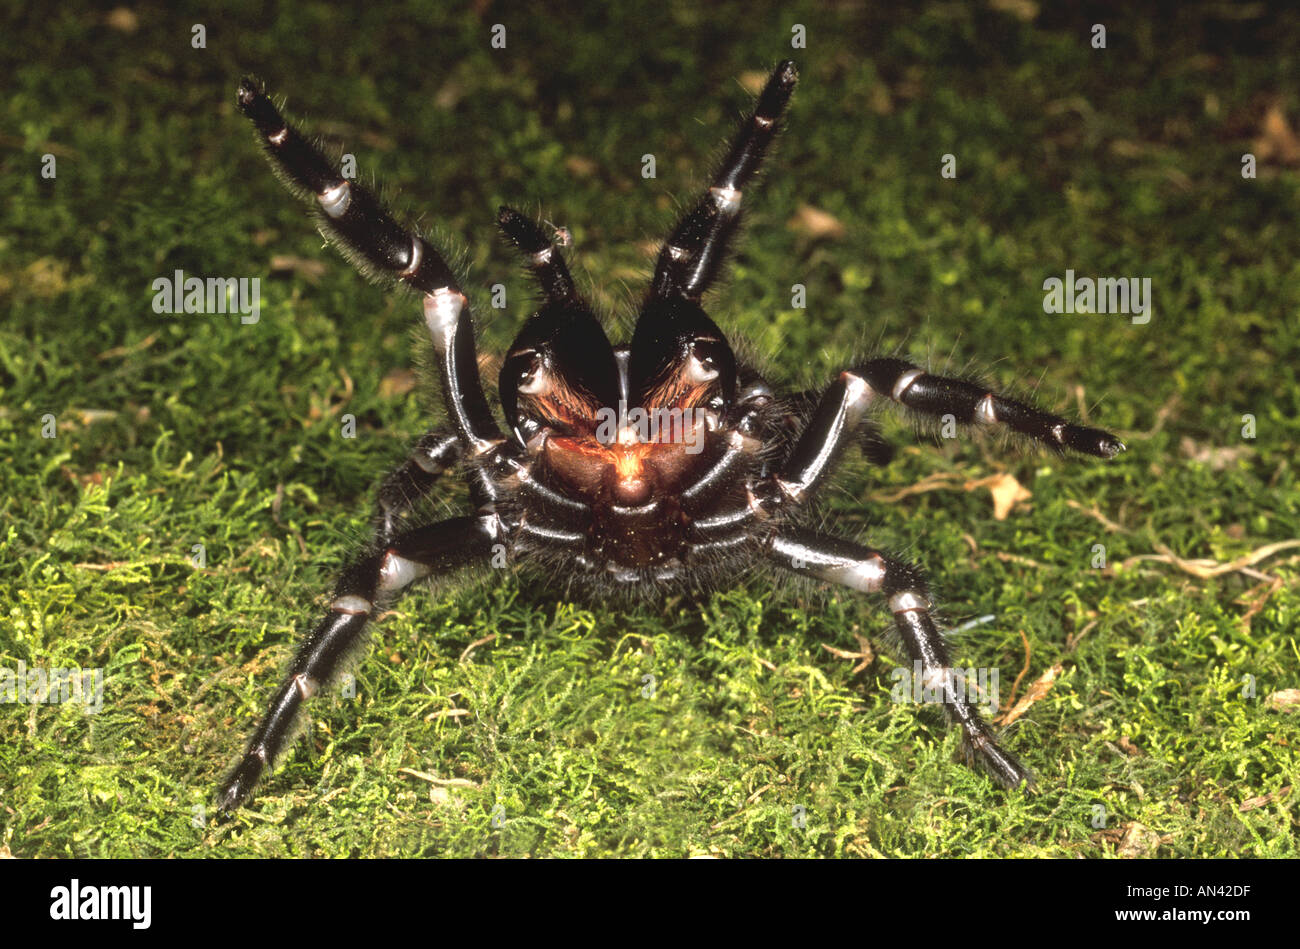 Sydney Funnel Web Spider, Atrax robustus, in a threat position showing fangs. These spiders are renowned for their highly toxic and fast acting venom. Stock Photo